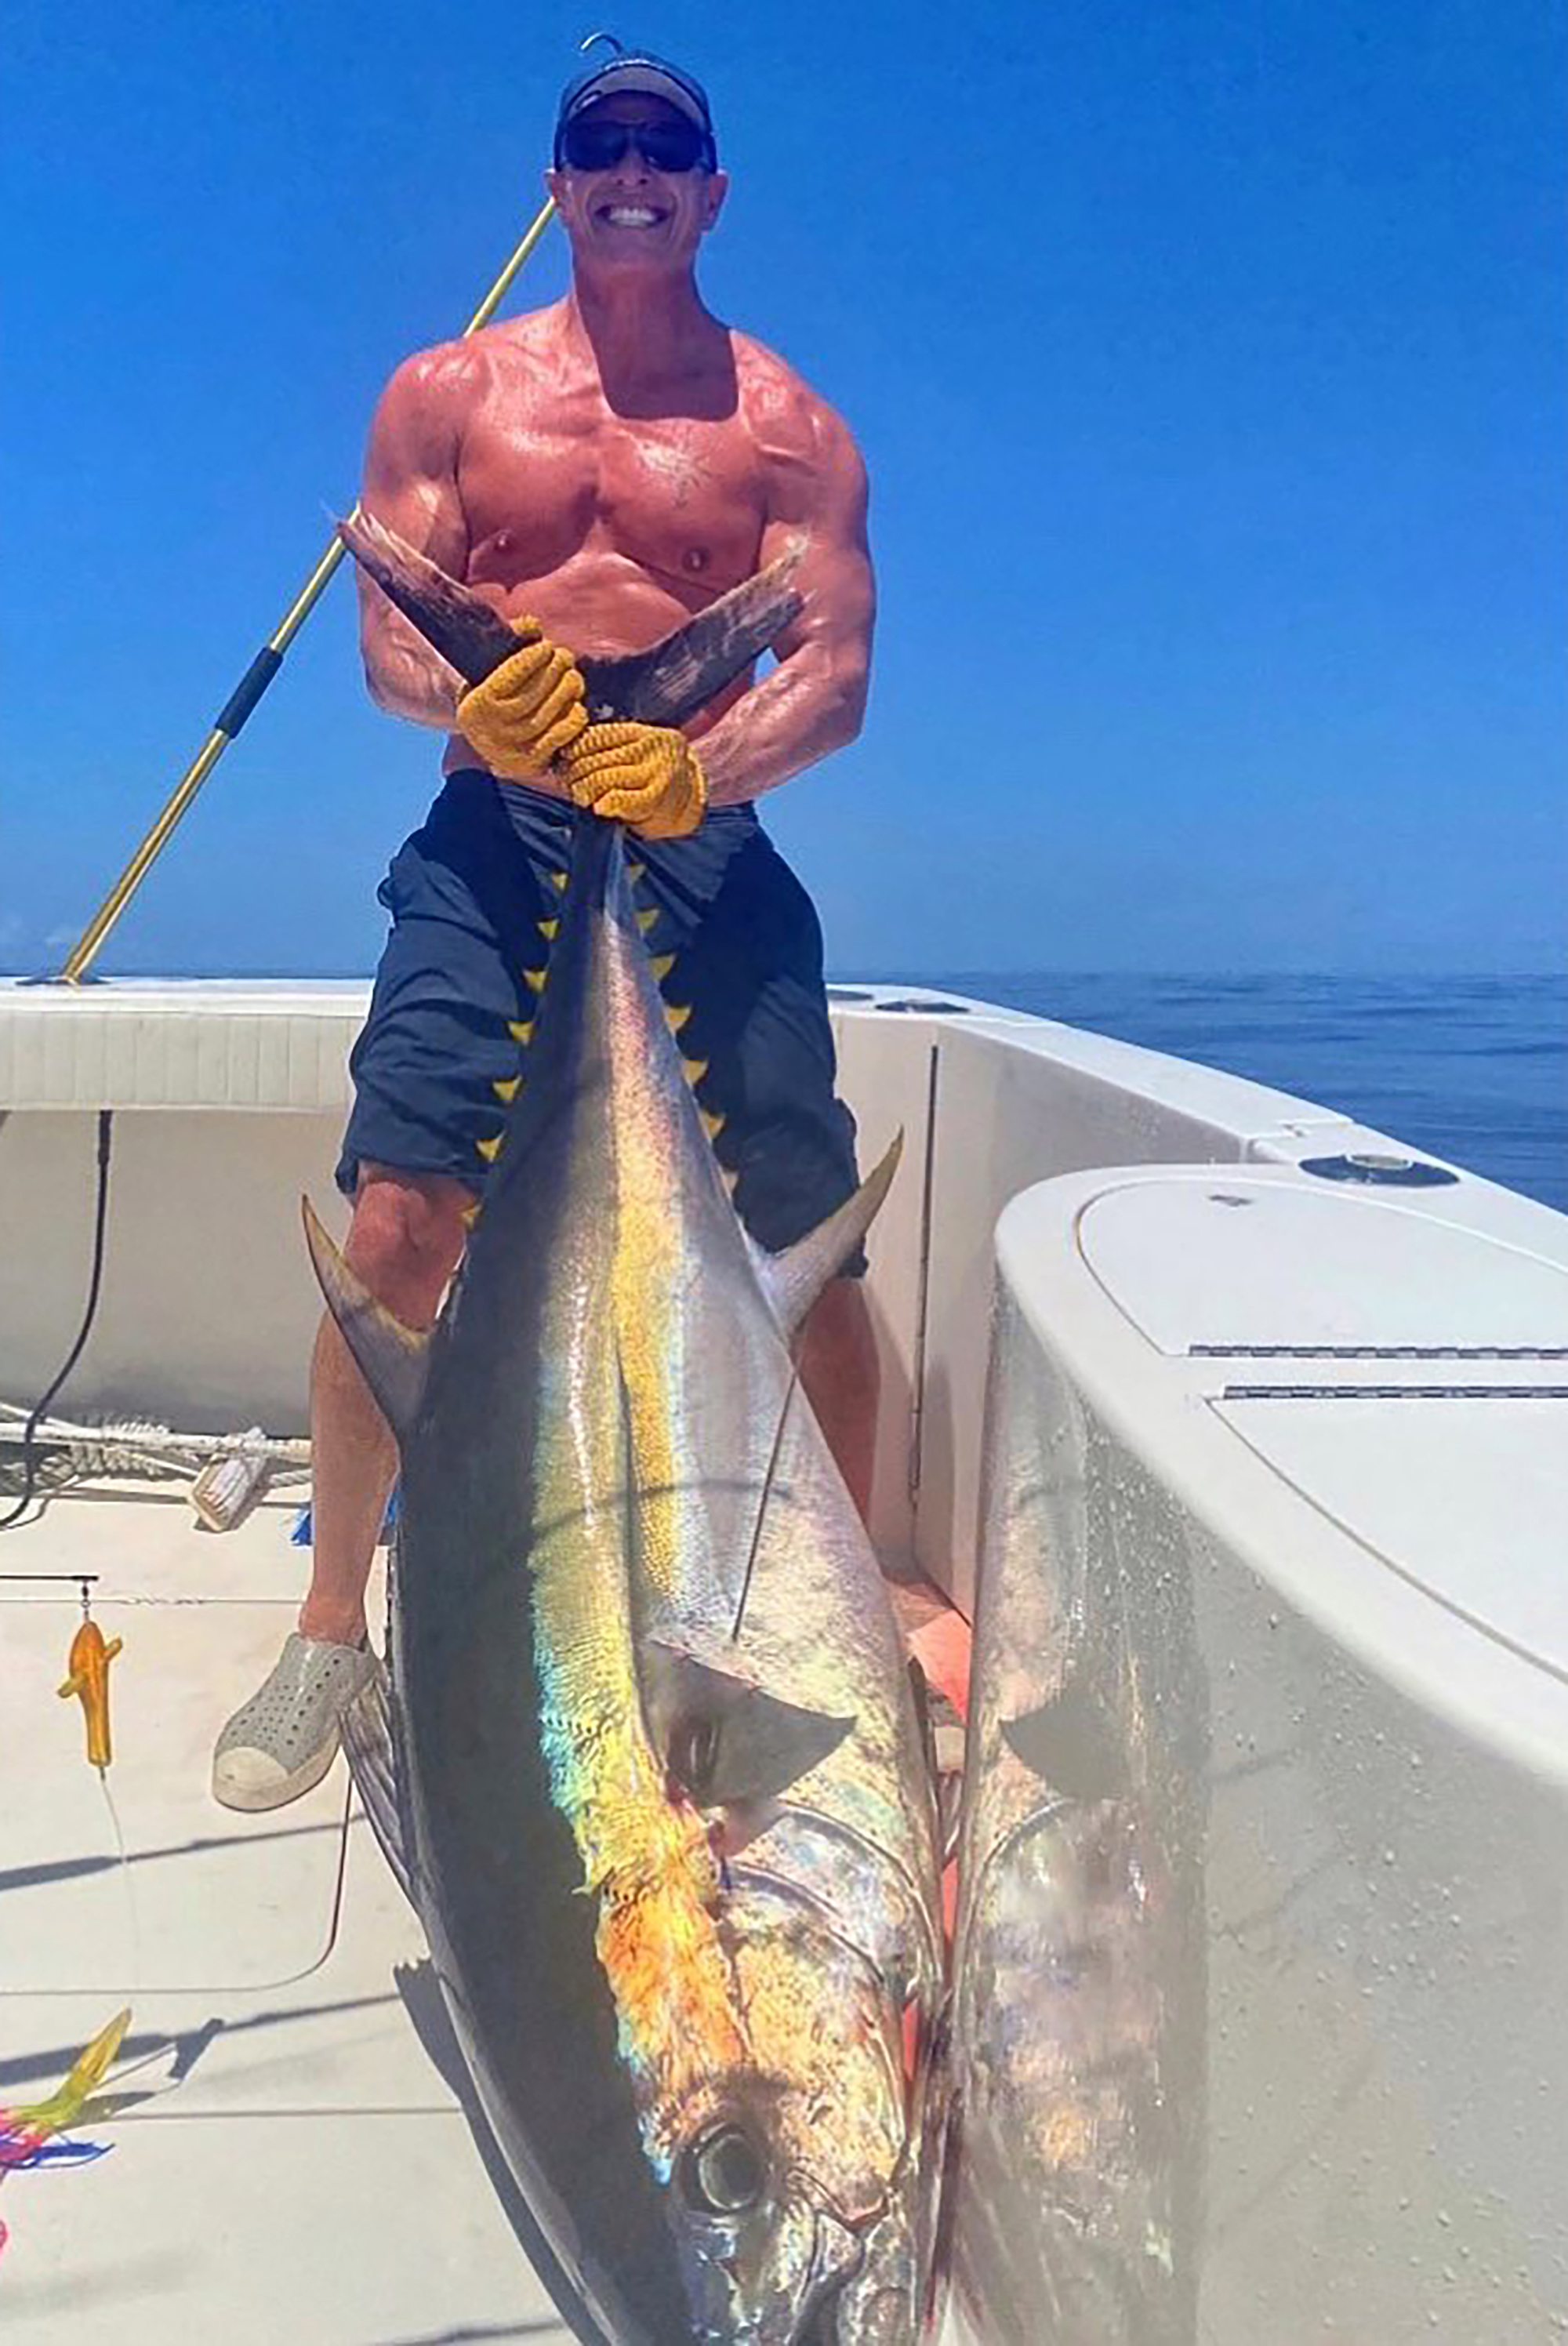 Shirtless Chris Cuomo flaunts muscles in fishing thirst trap